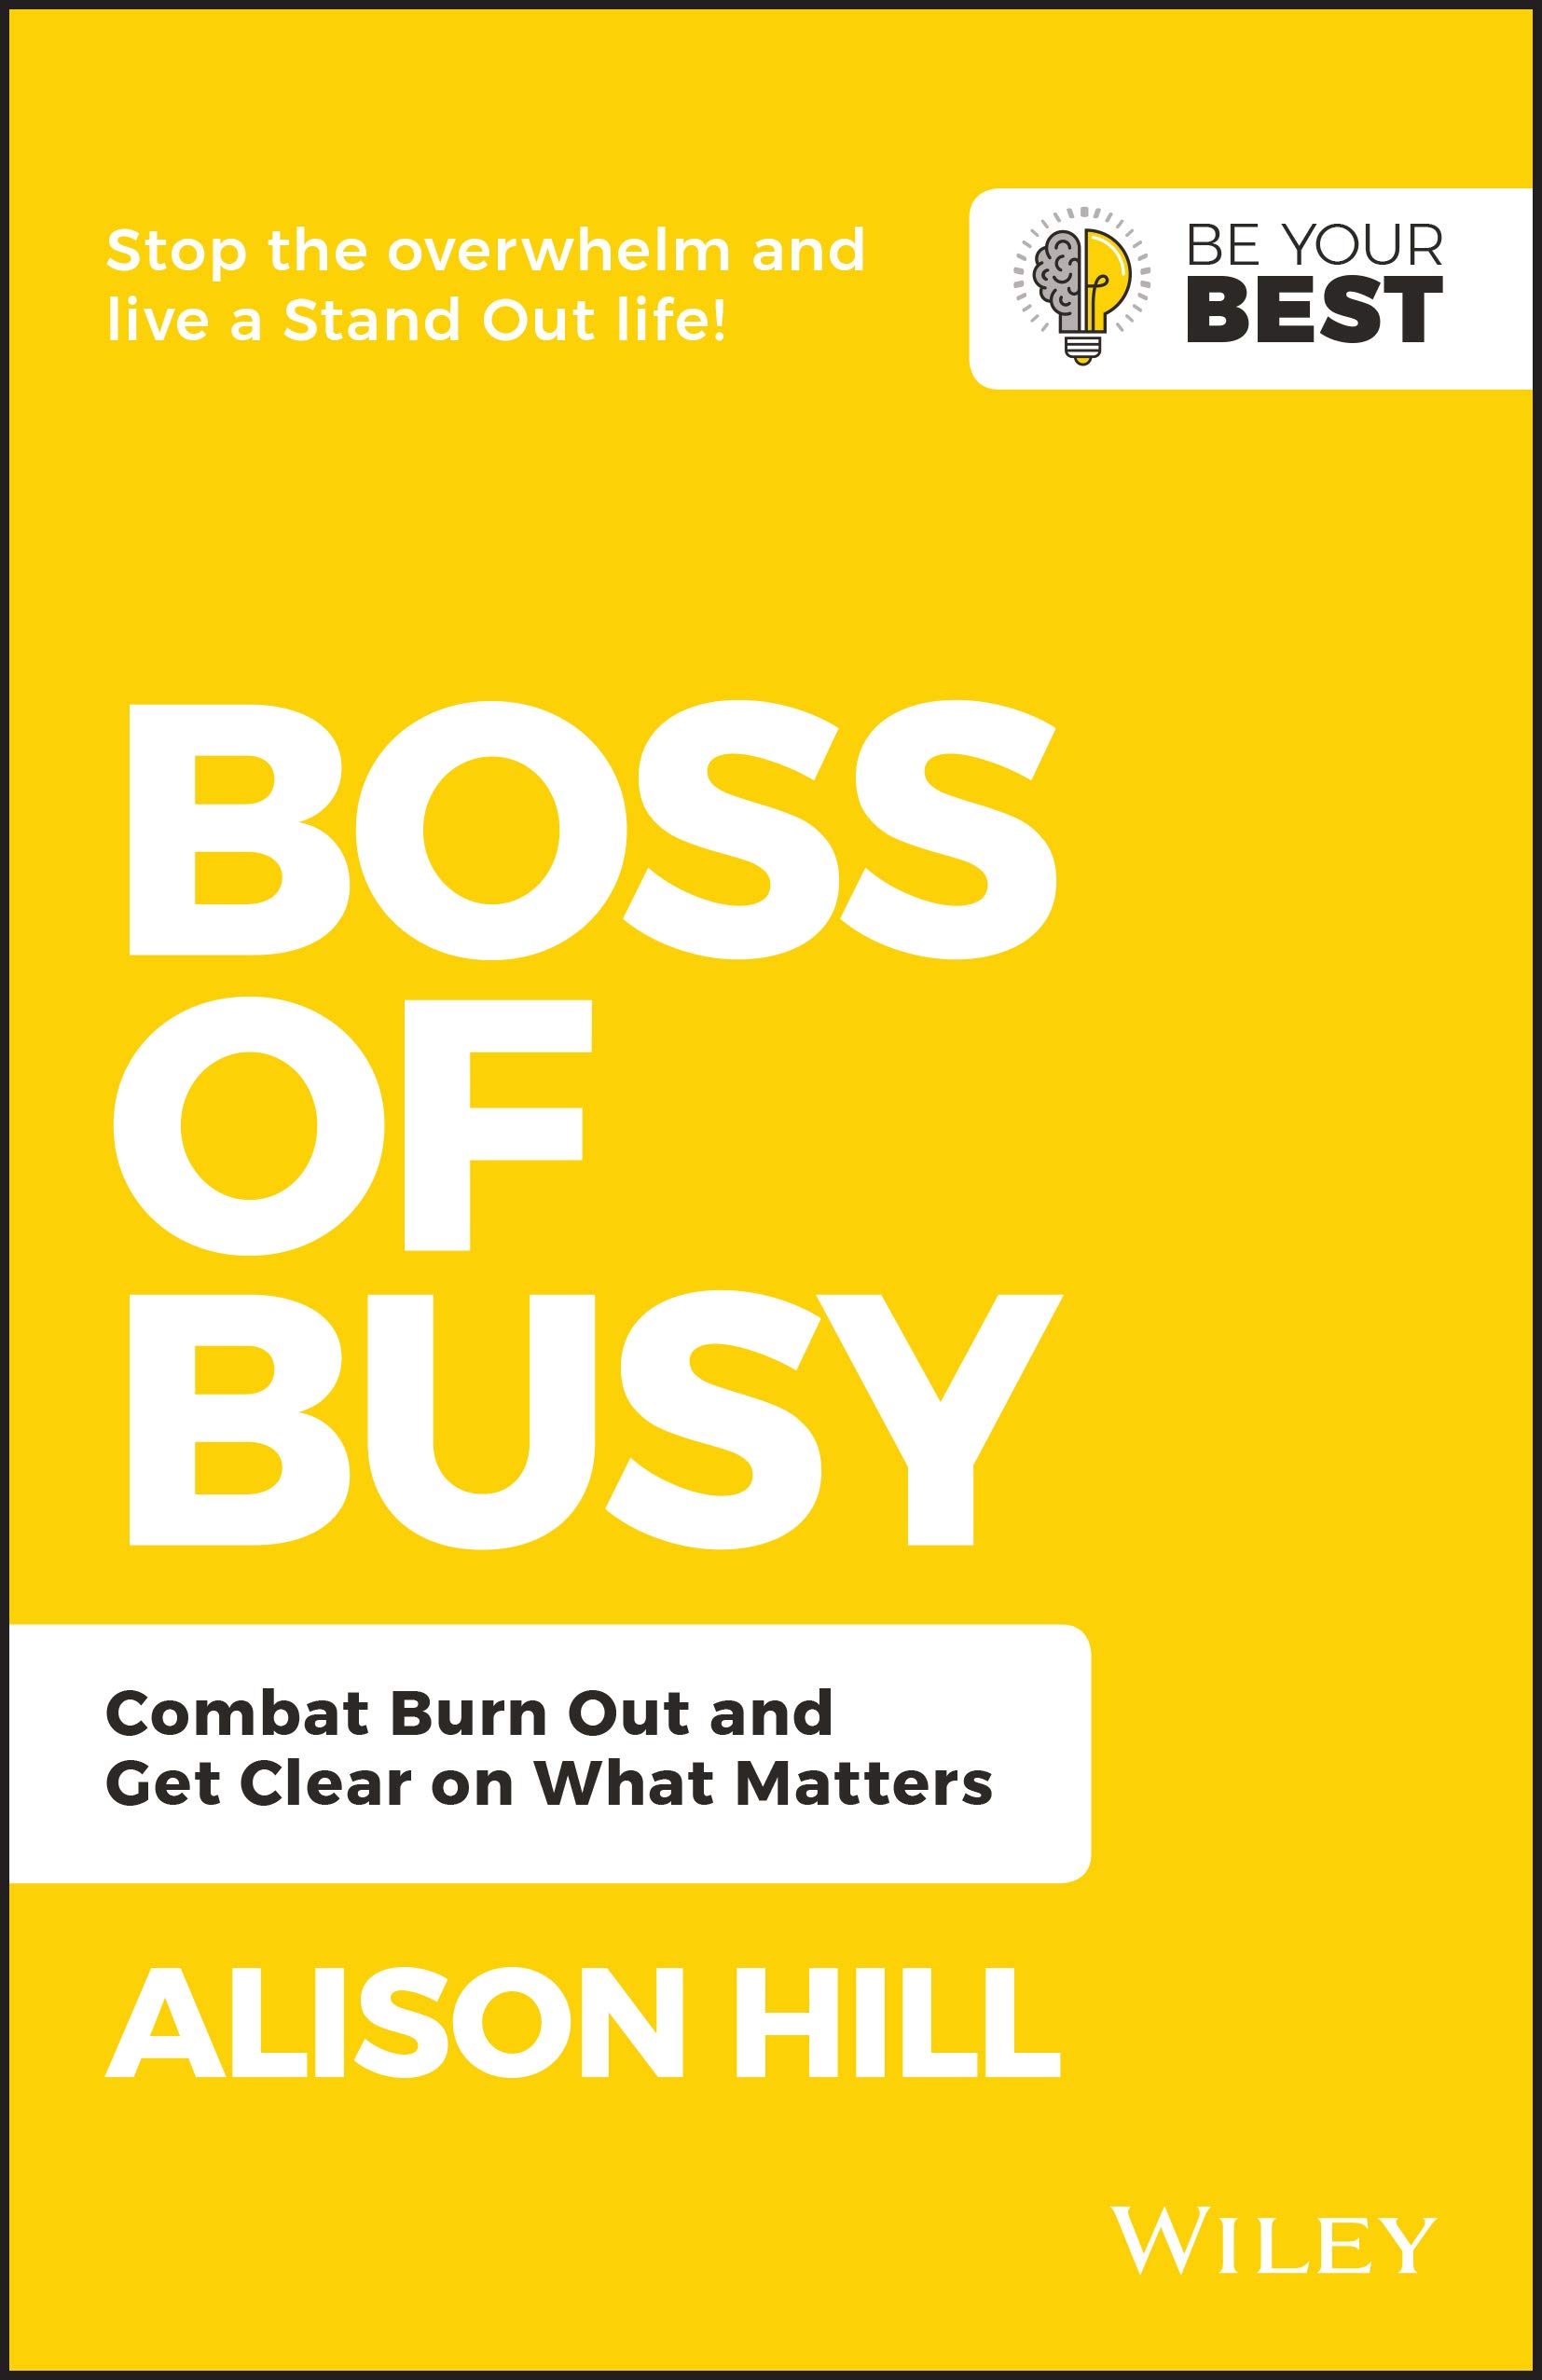 Boss of Busy: Combat Burn Out and Get Clear on What Matters (Be Your Best)